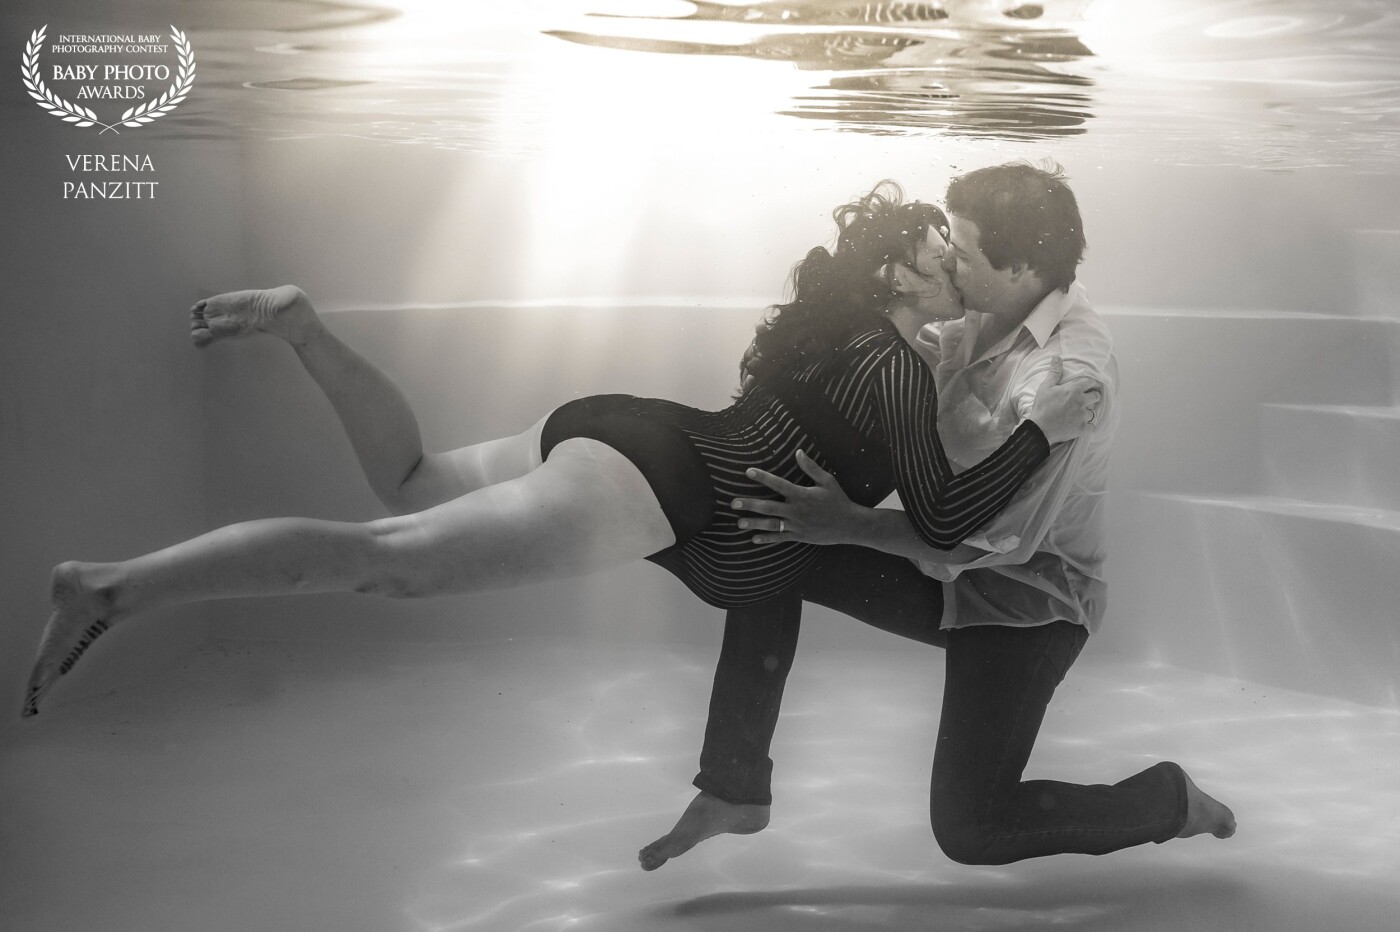 This wonderful couple expected their 4th child and wanted a special fotoshooting, something extra. They reached out for a fotografer on social media and asked for ideas. I always wanted to try out underwaterfotografy, so I contacted them. They immediately loved the idea. This picture was captured in a reshoot. The first attempt failed due to bad light conditions and low quality gear. Thankfully they gave me a second chance and we had a lot of fun practicing on a super cold summer day.